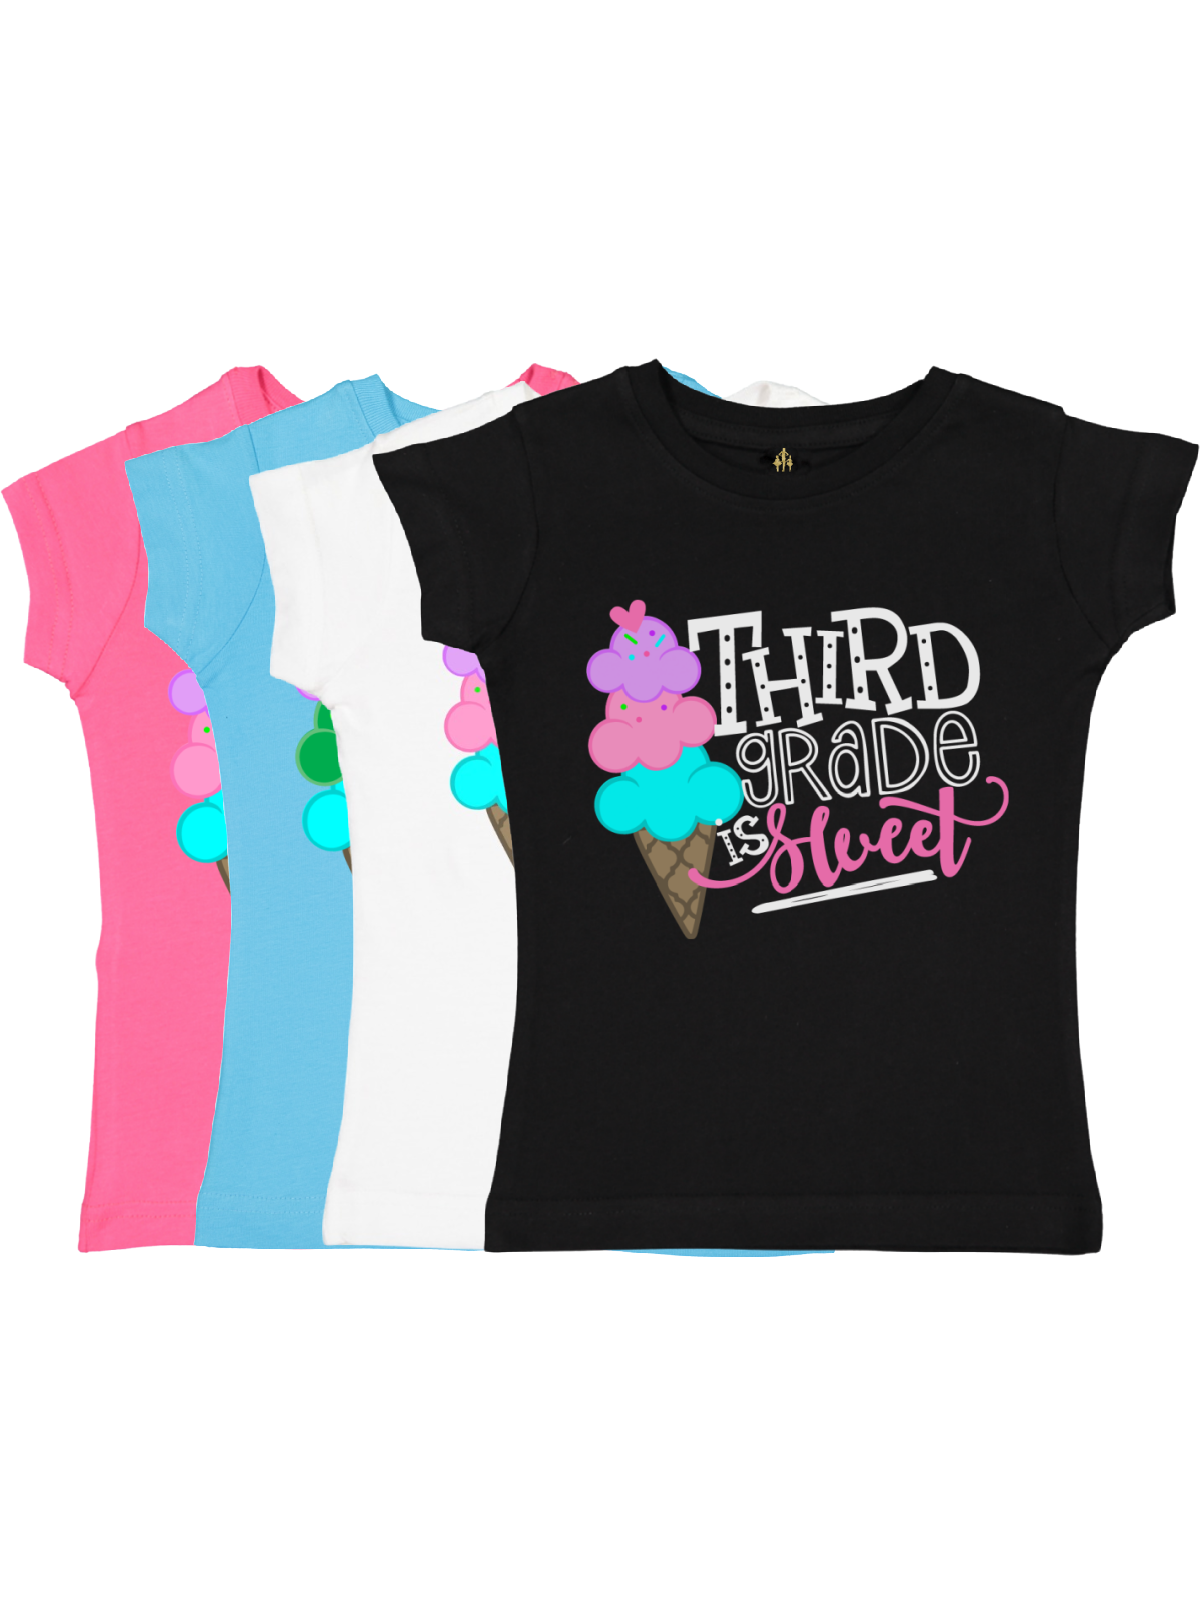 Third Grade is Sweet Girls First Day of School Shirts in Black, White, Blue, and Pink